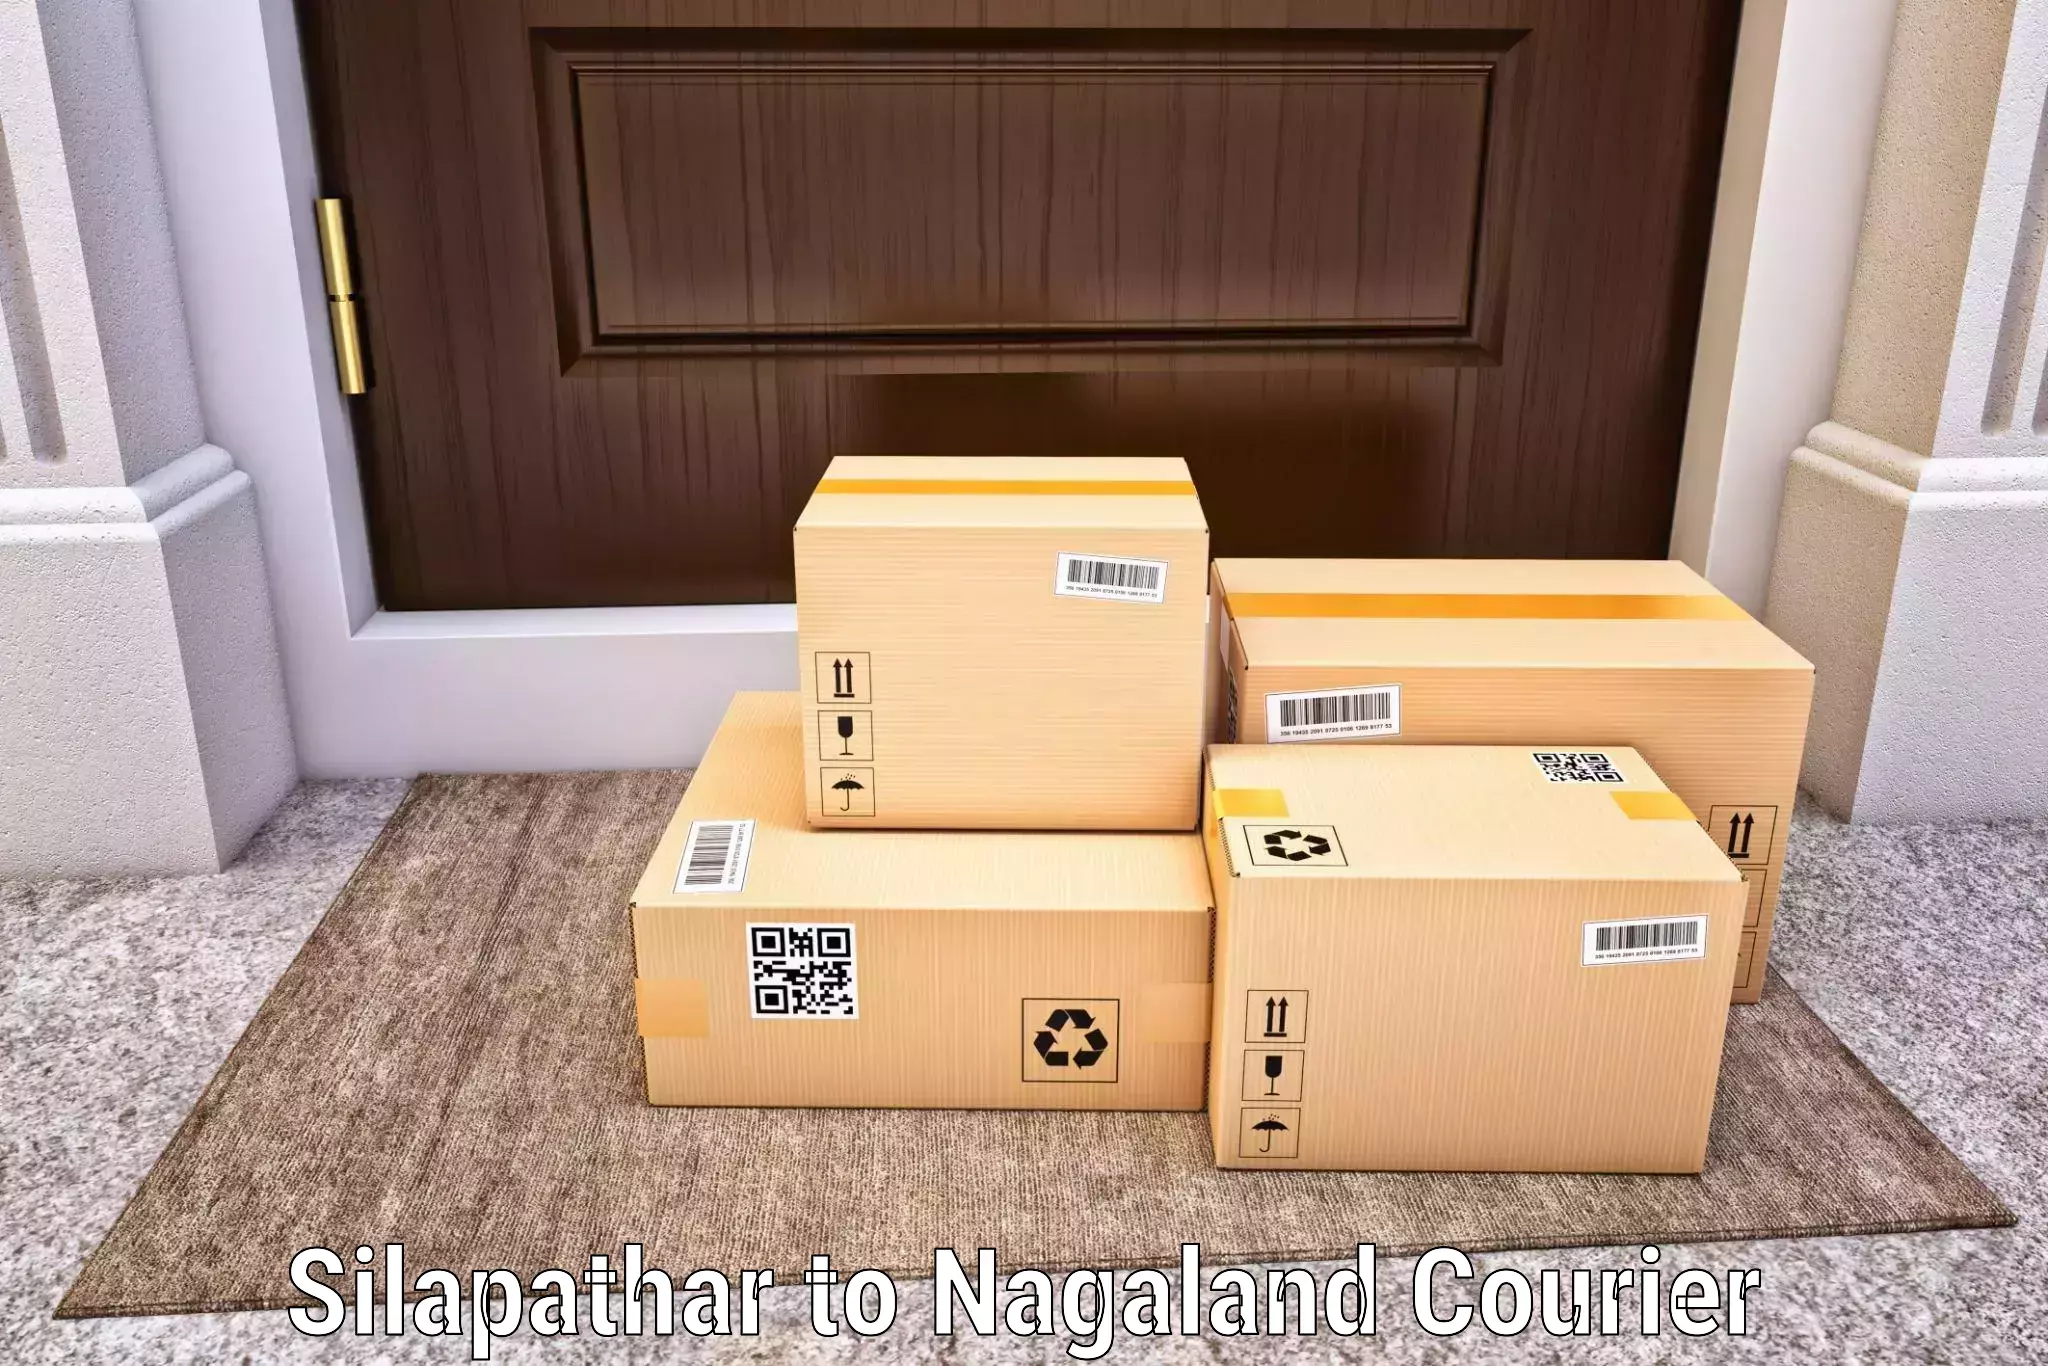 24-hour courier services Silapathar to Mon